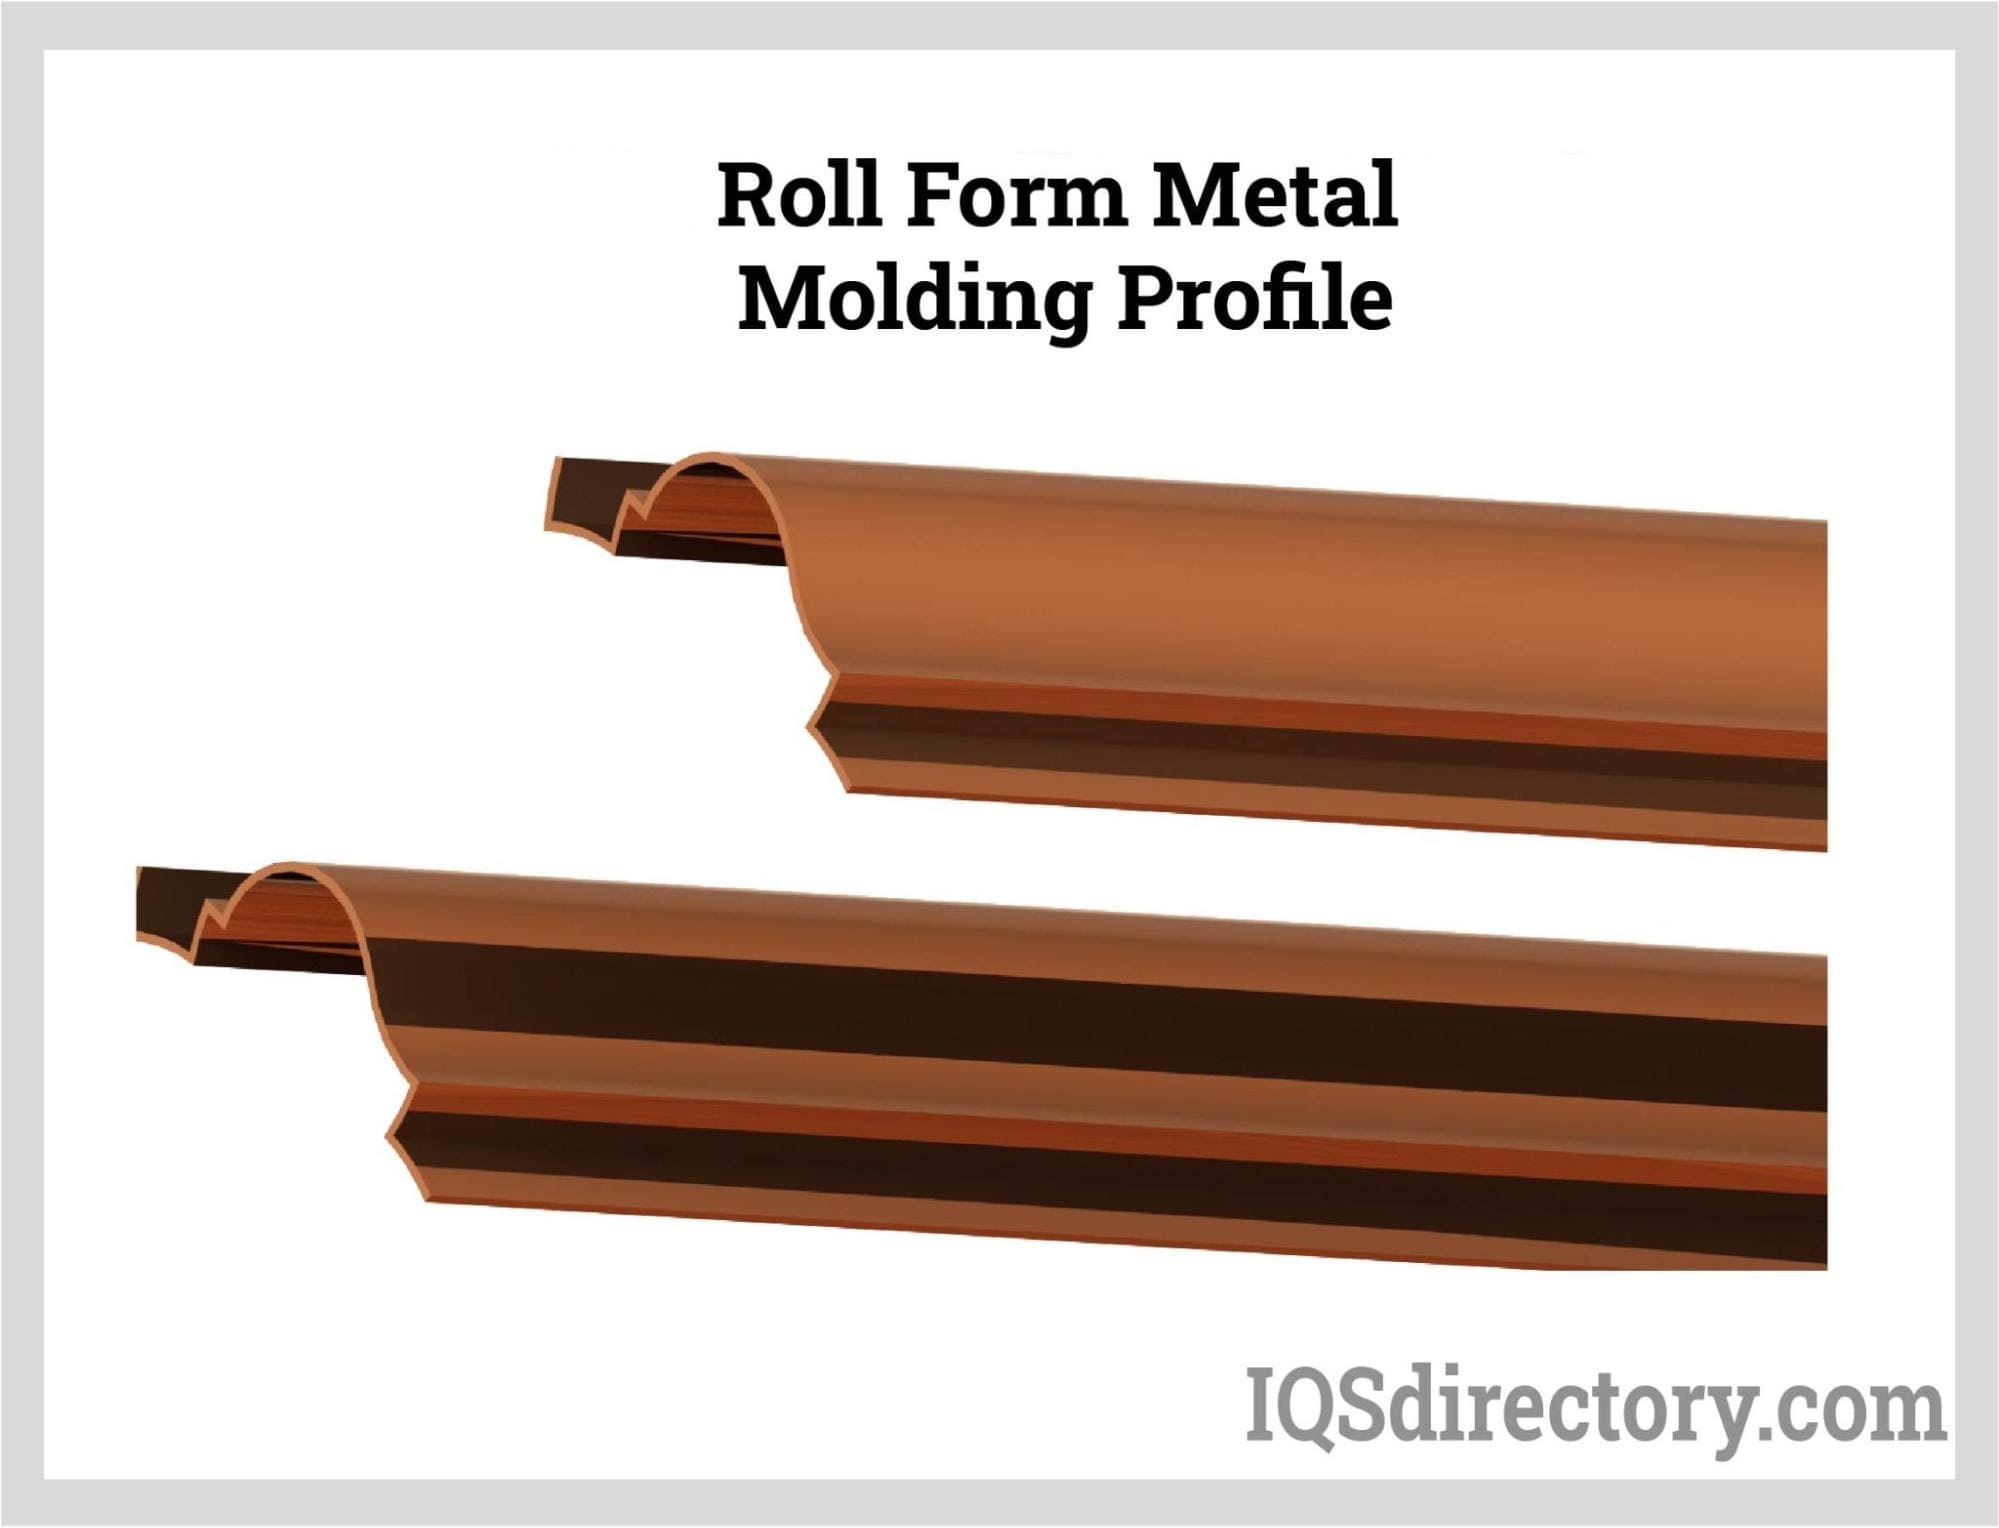 Roll Form Metal Molding Profile